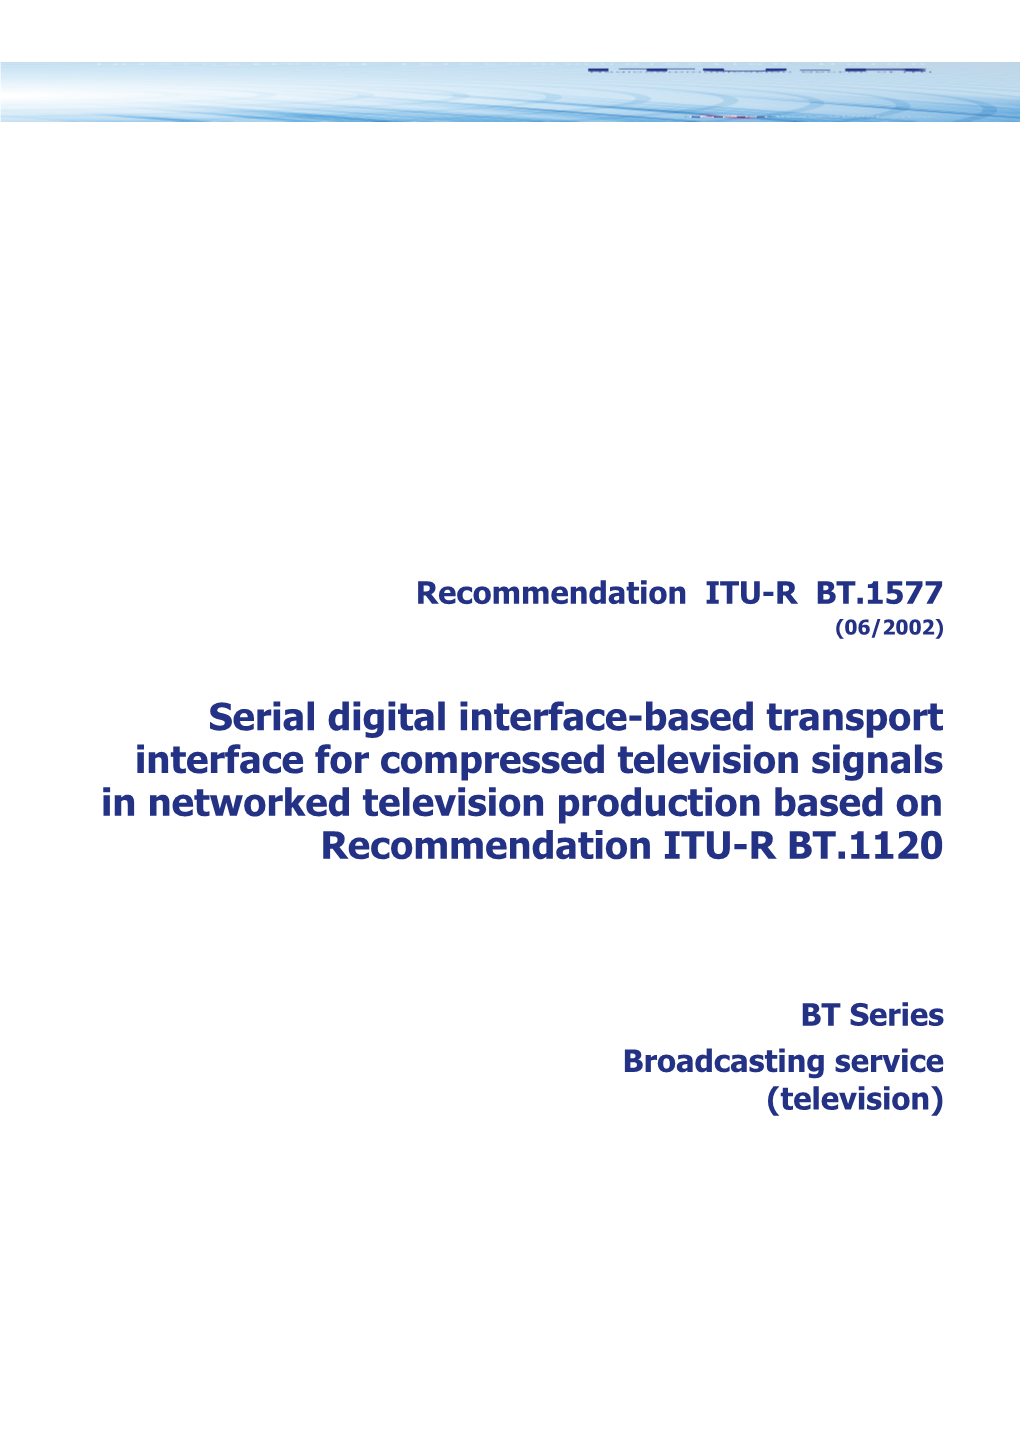 RECOMMENDATION ITU-R BT.1577* - Serial Digital Interface-Based Transport Interface For